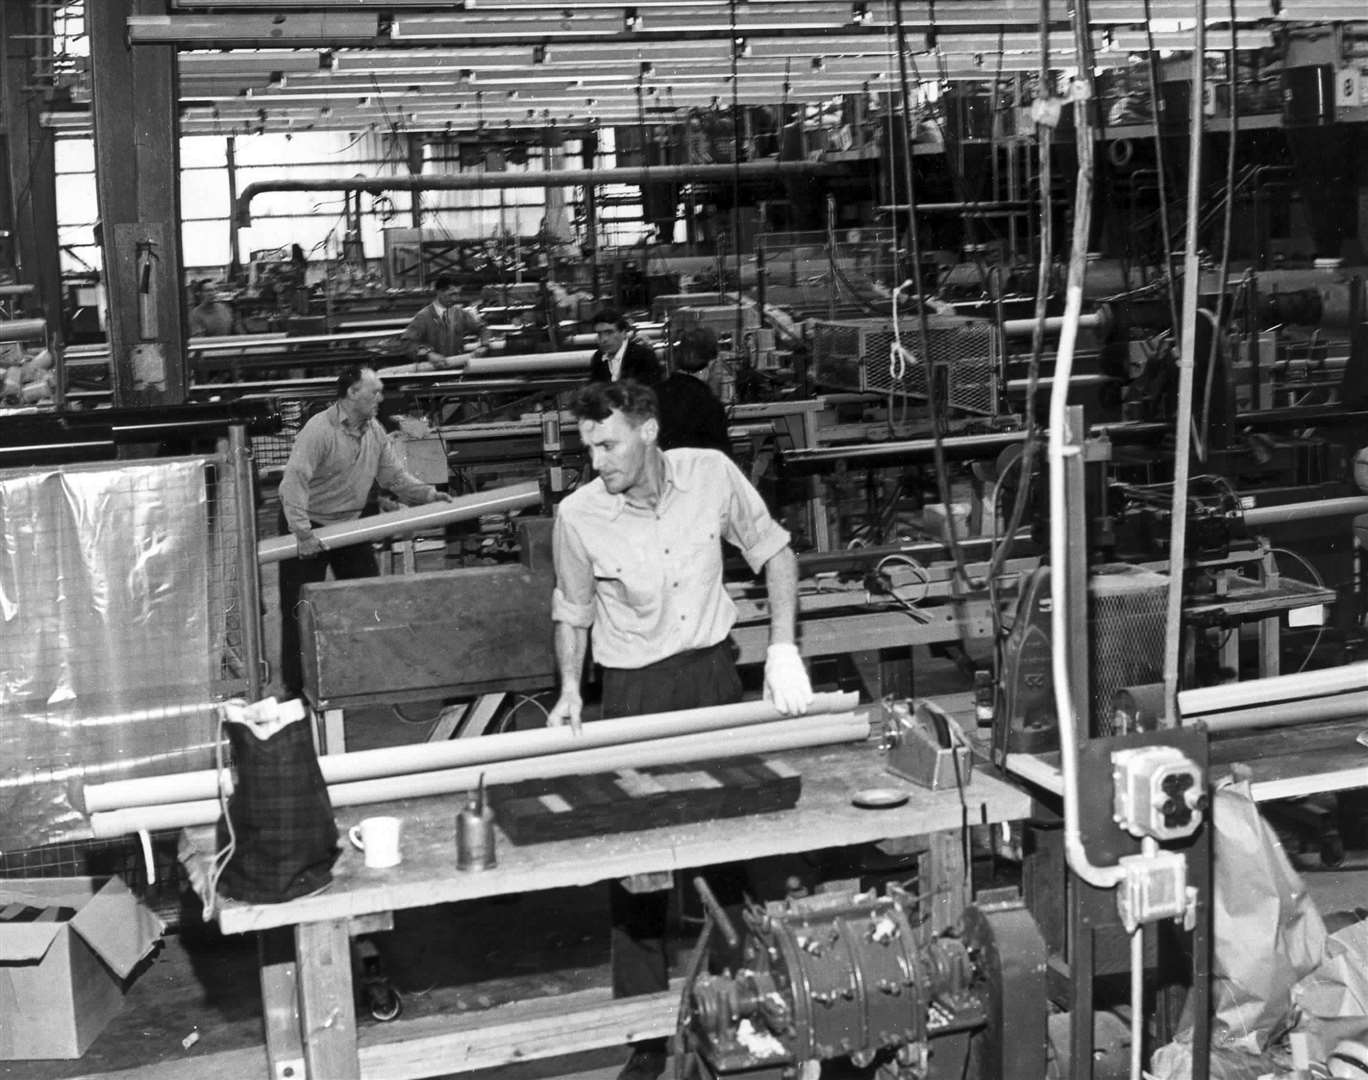 Workers producing lengths of gullies and drainpipes at Marley Tile Co. Ltd. in Harrietsham in November 1966